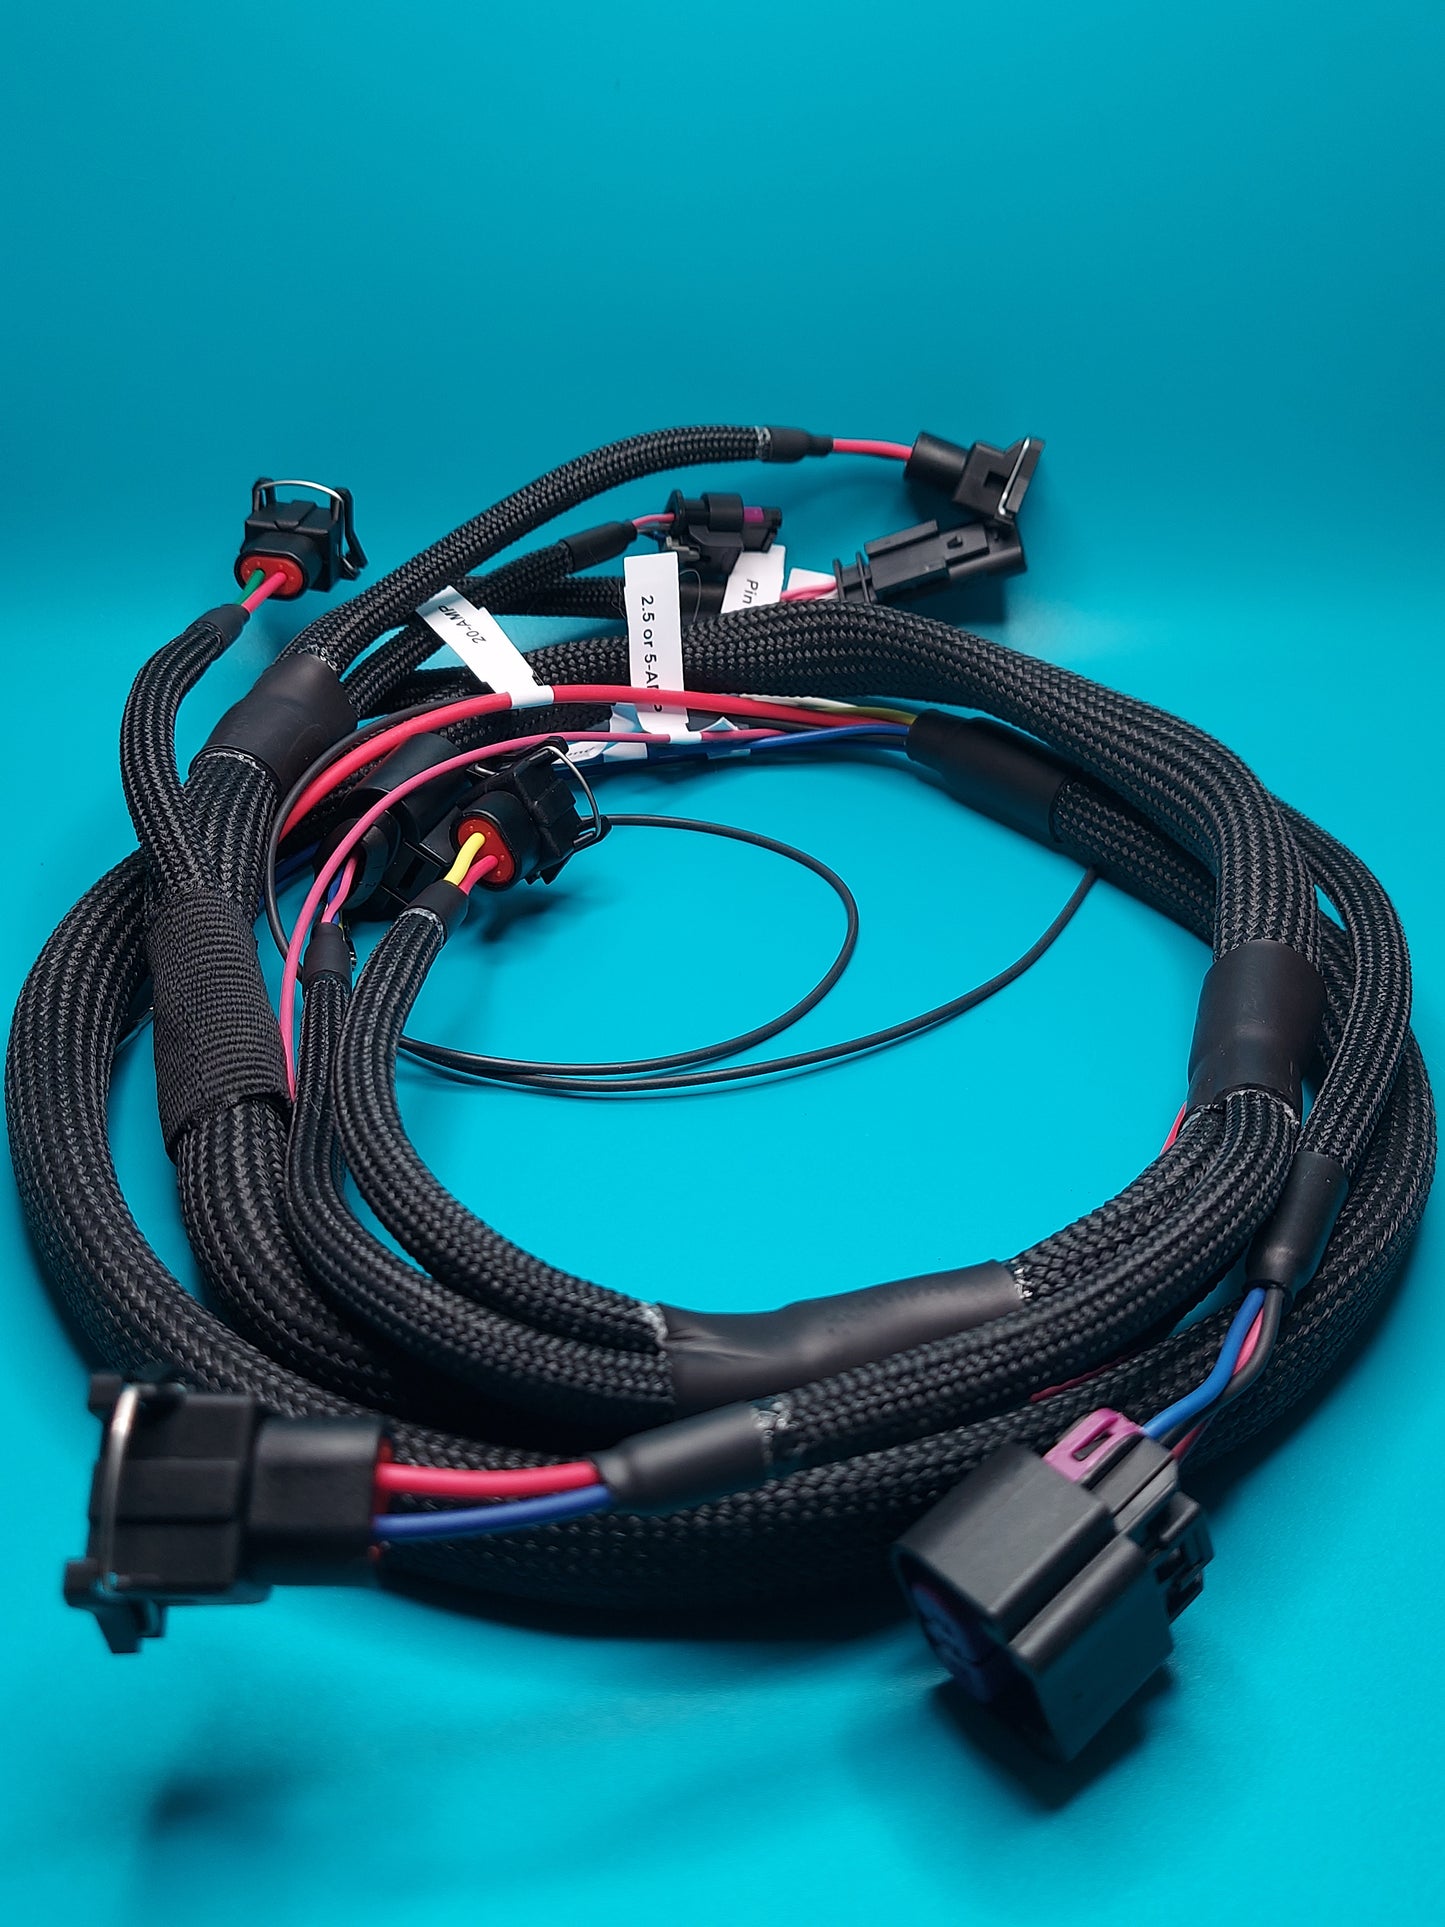 MQB MPI Harness with Ethanol Sensor Connection